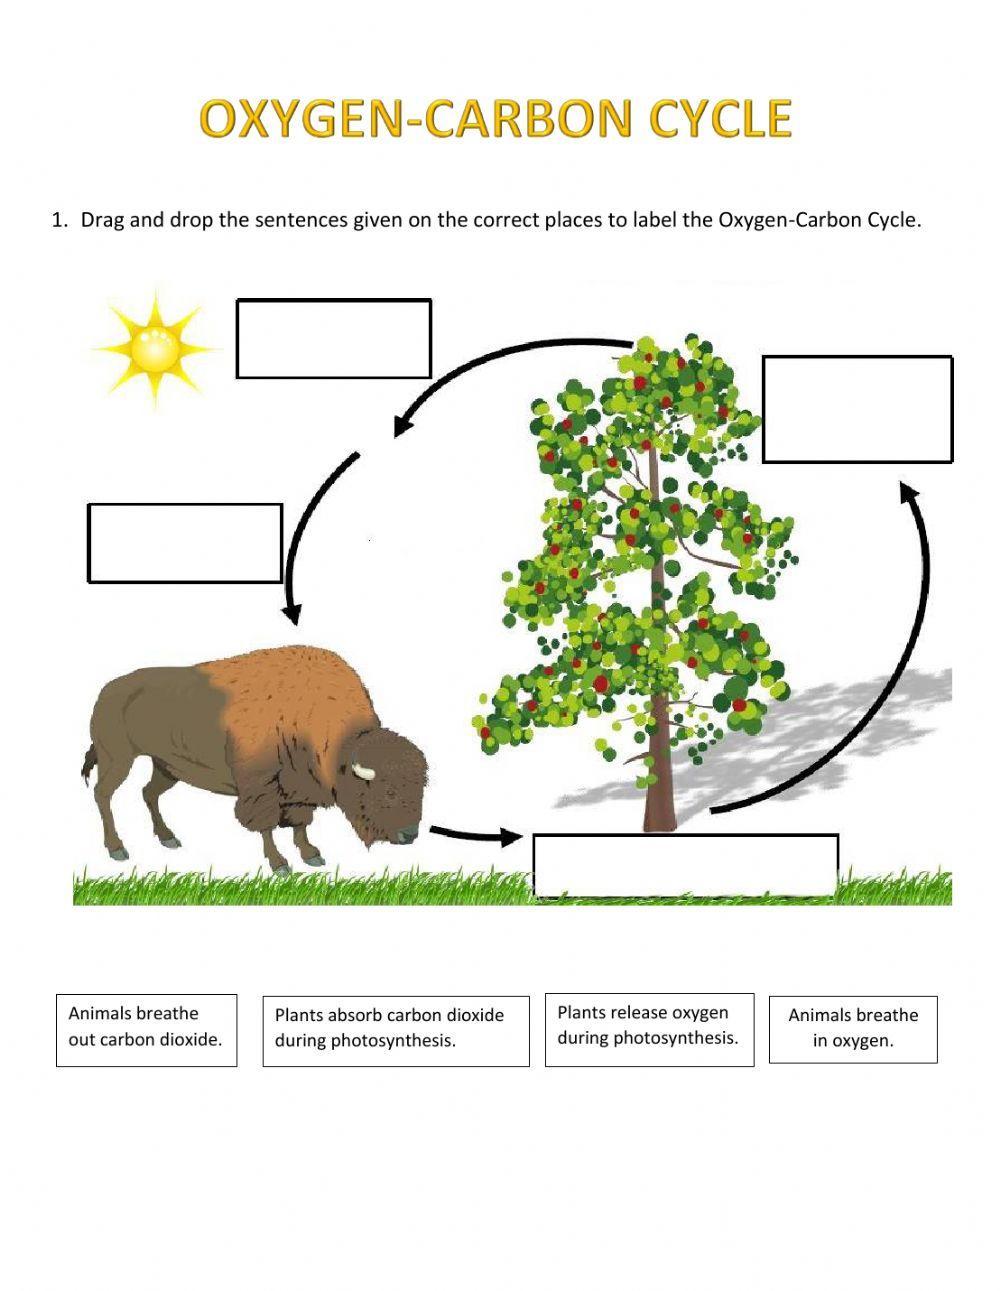 Oxygen-Carbon Cycle